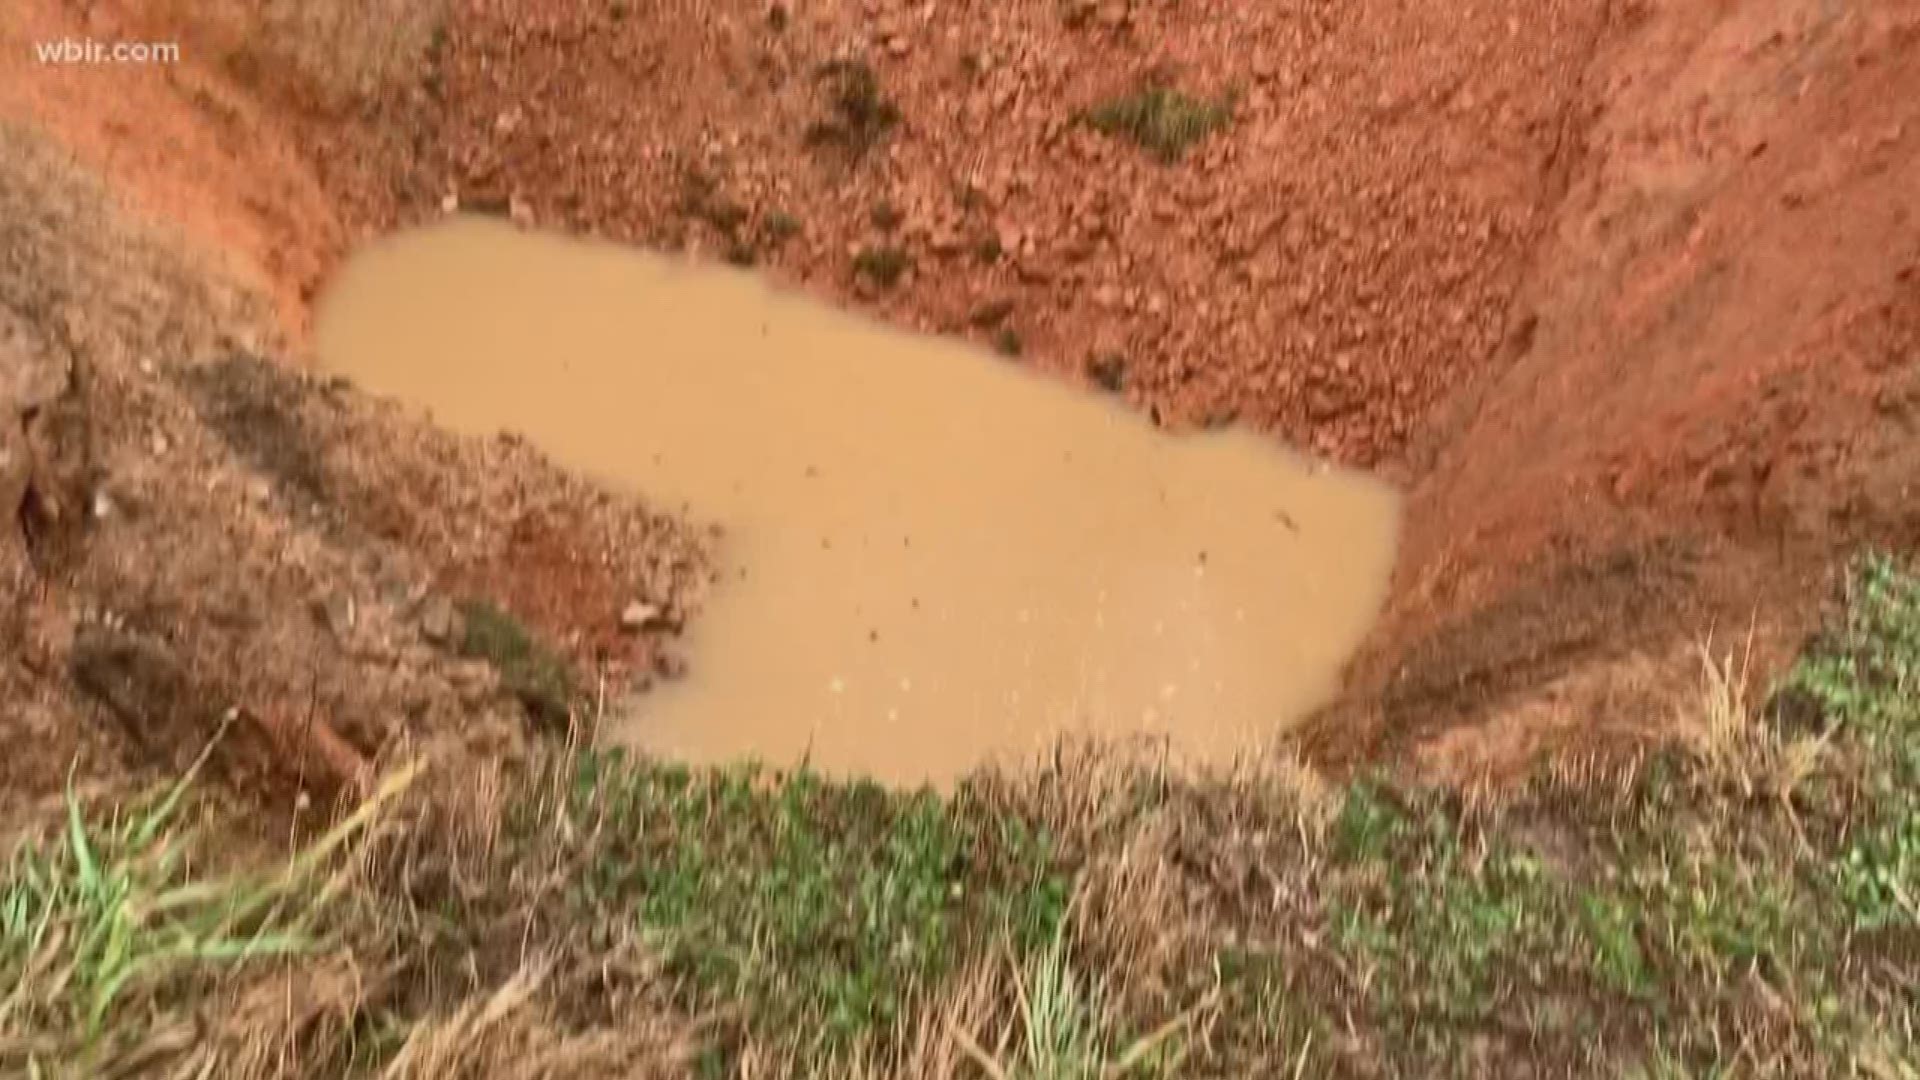 The sinkhole, which is about 25 feet deep and 40 feet across, it's located near the spring where Maynardville gets its water. Because the sinkhole muddied up the spring, they haven't been able to treat the water.